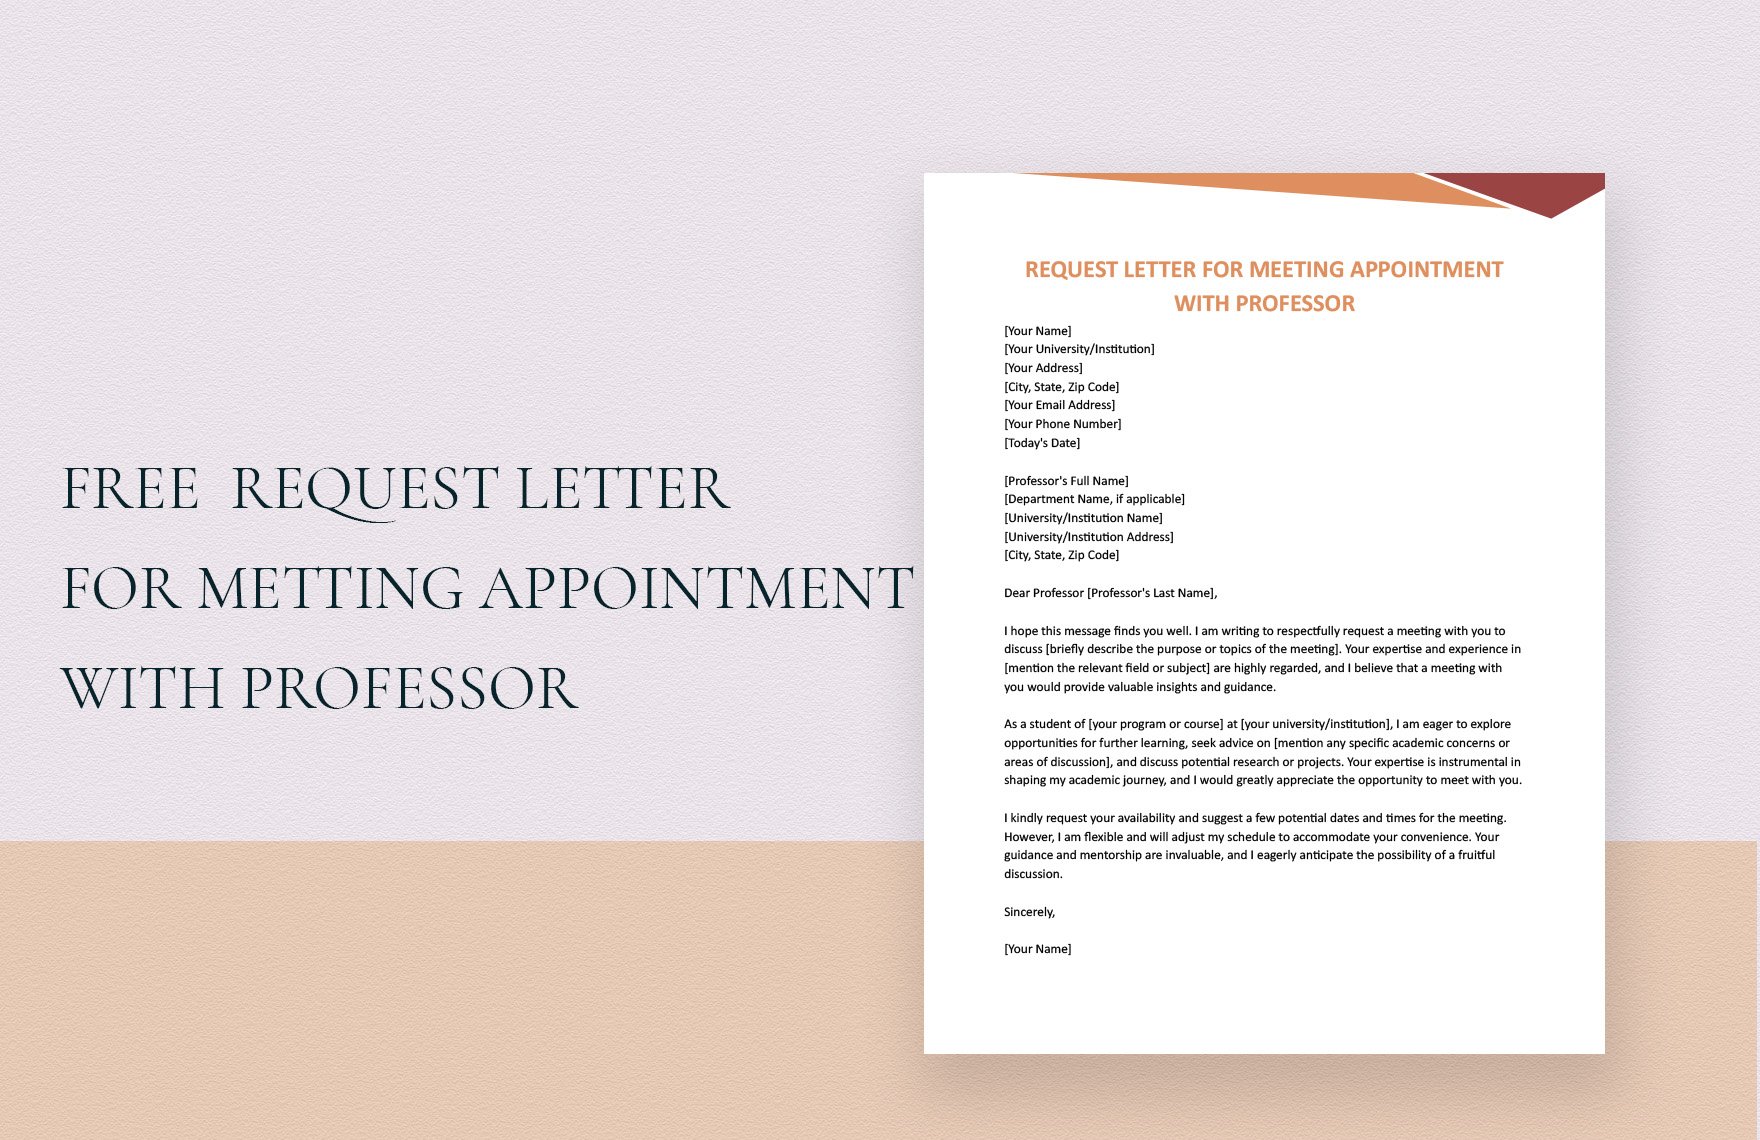 Request Letter For Meeting Appointment With Professor